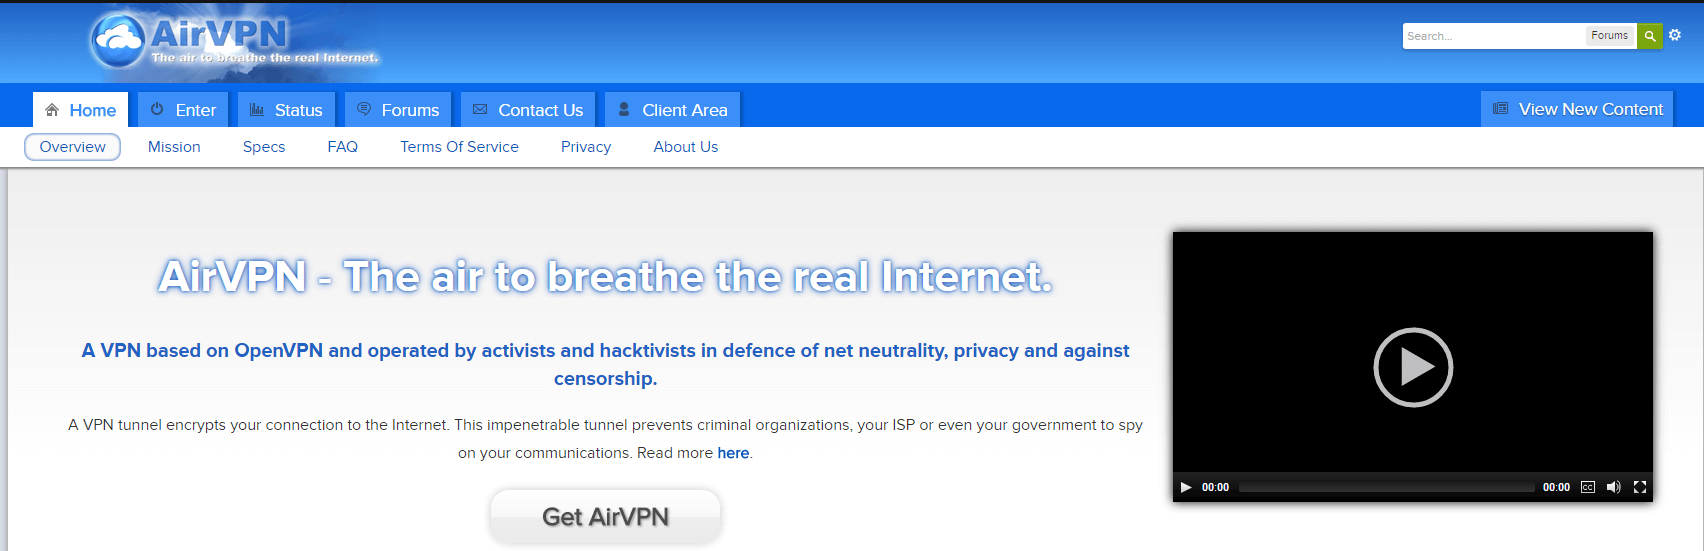 Experts Recommend AirVPN The Most